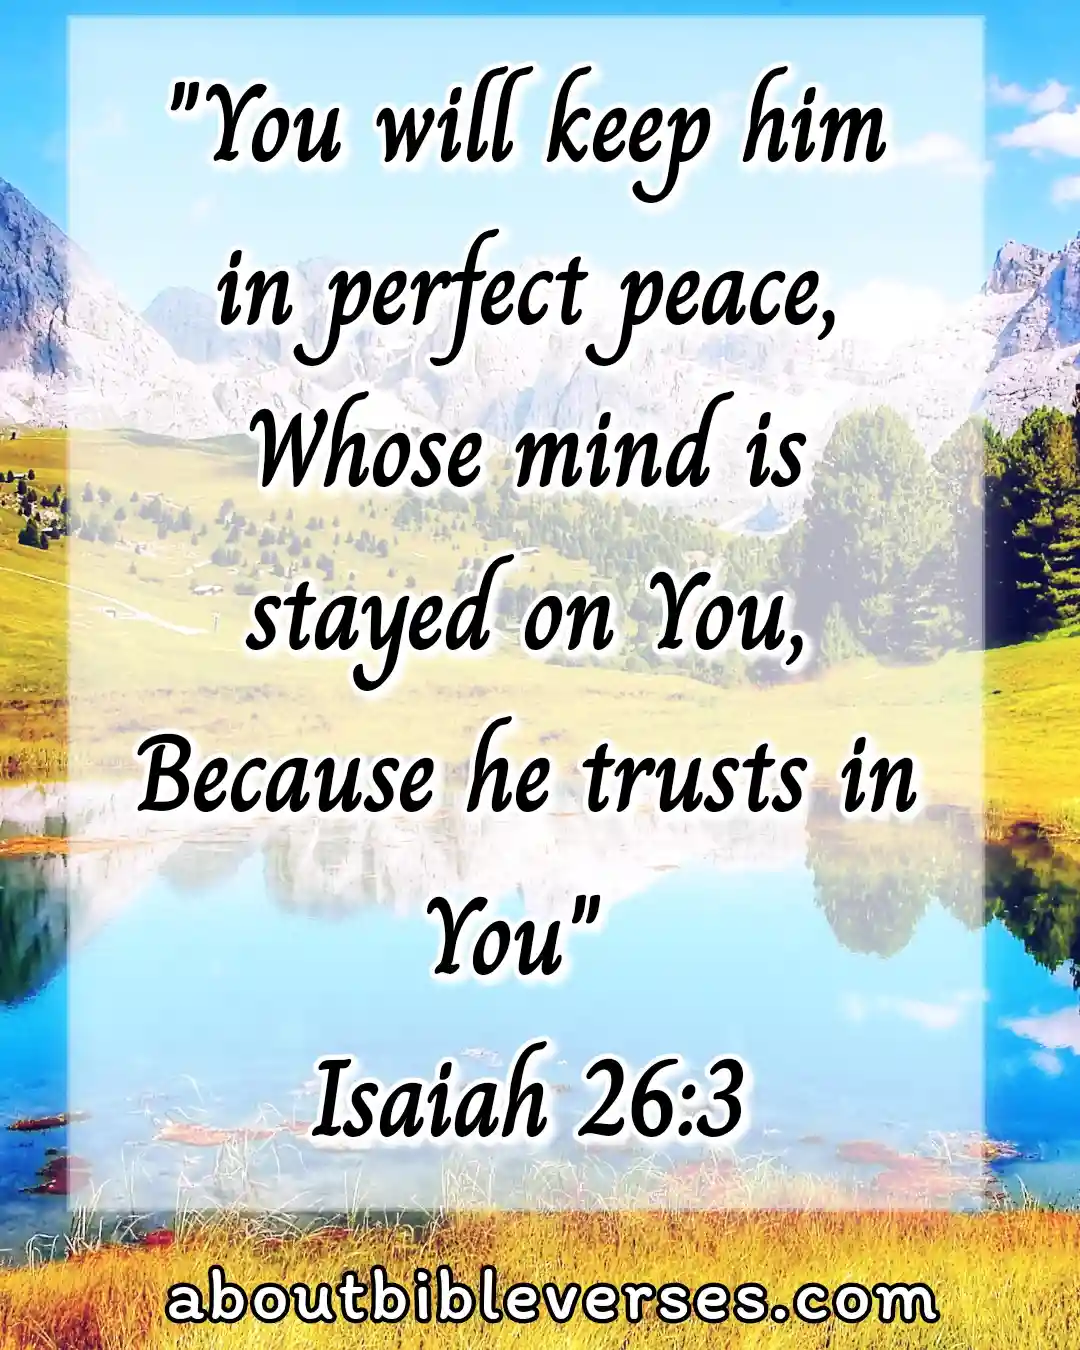 Bible Verses About Trusting God In Difficult Times (Isaiah 26:3)